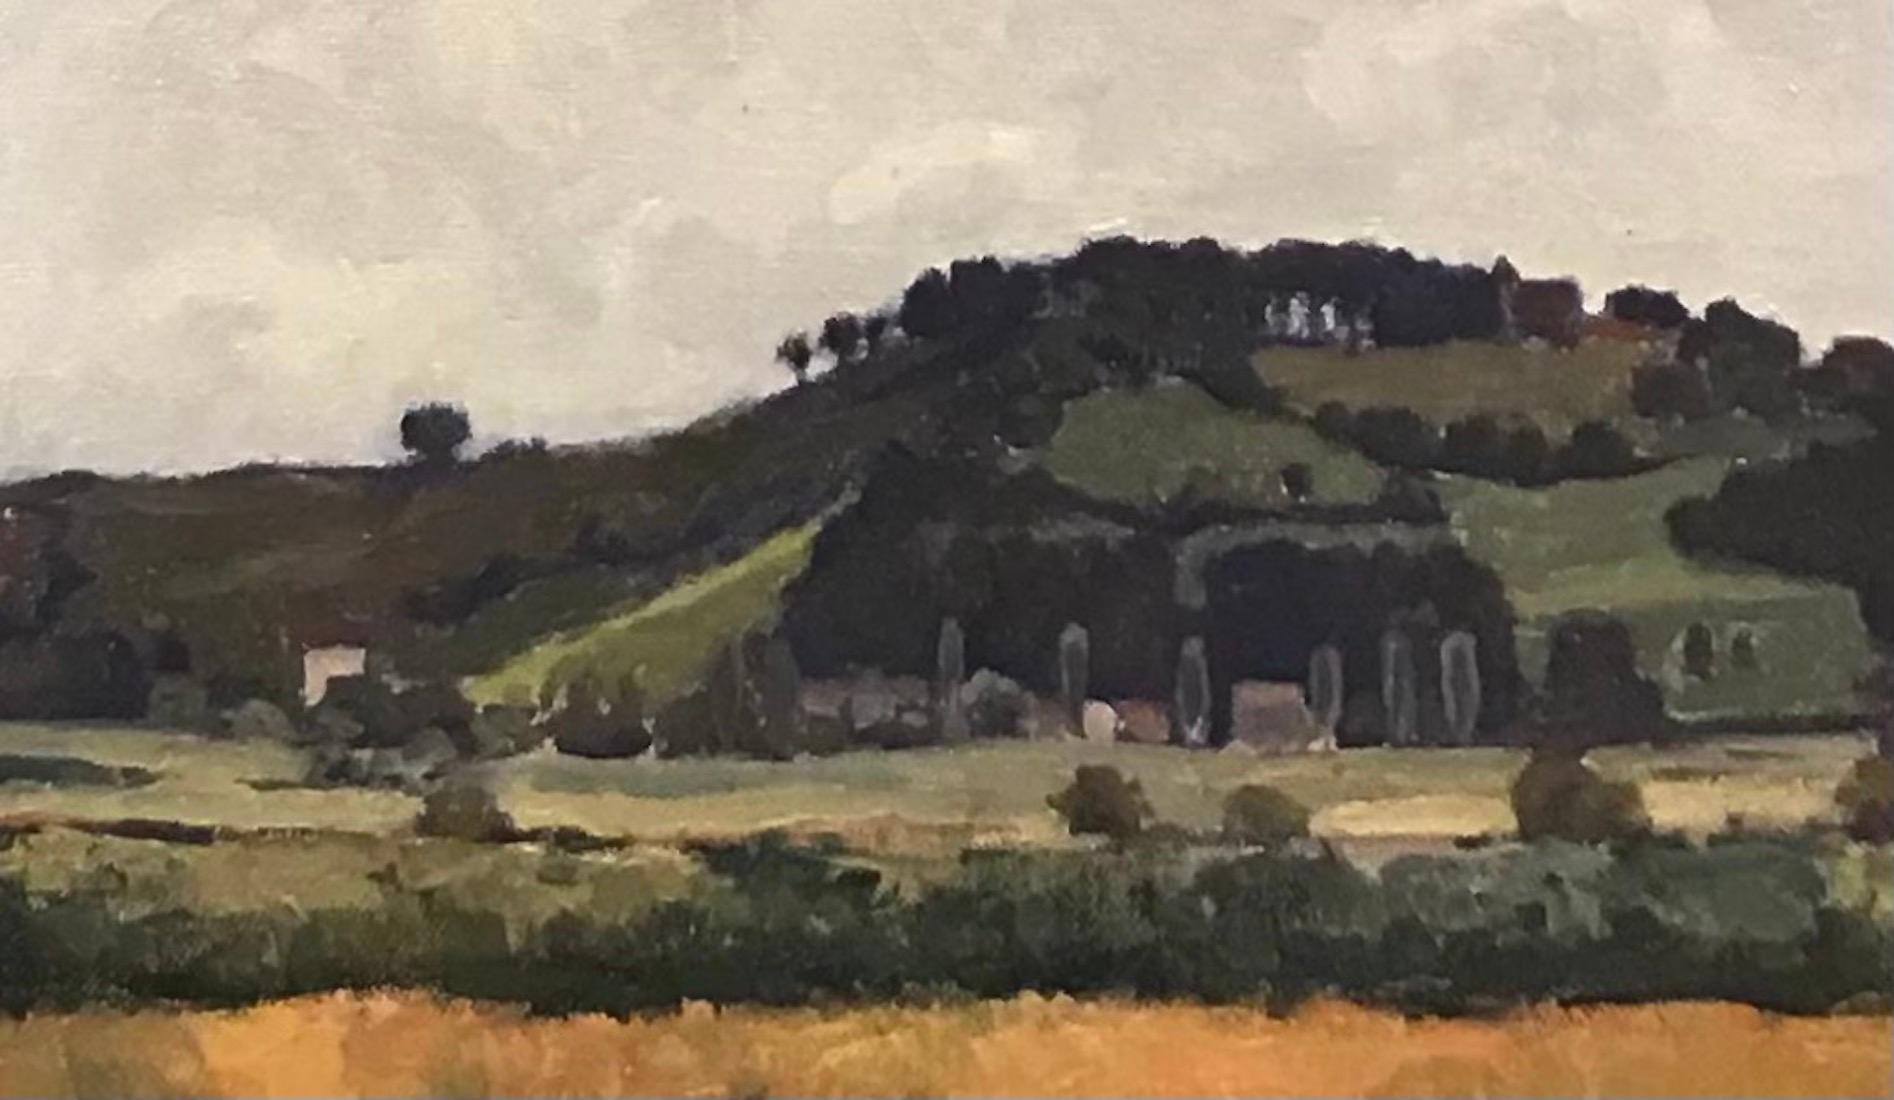 Montagny by Adolphe de Siebenthal - Oil on canvas 50x61 cm - Beige Landscape Painting by Adolphe DE SIEBENTHAL